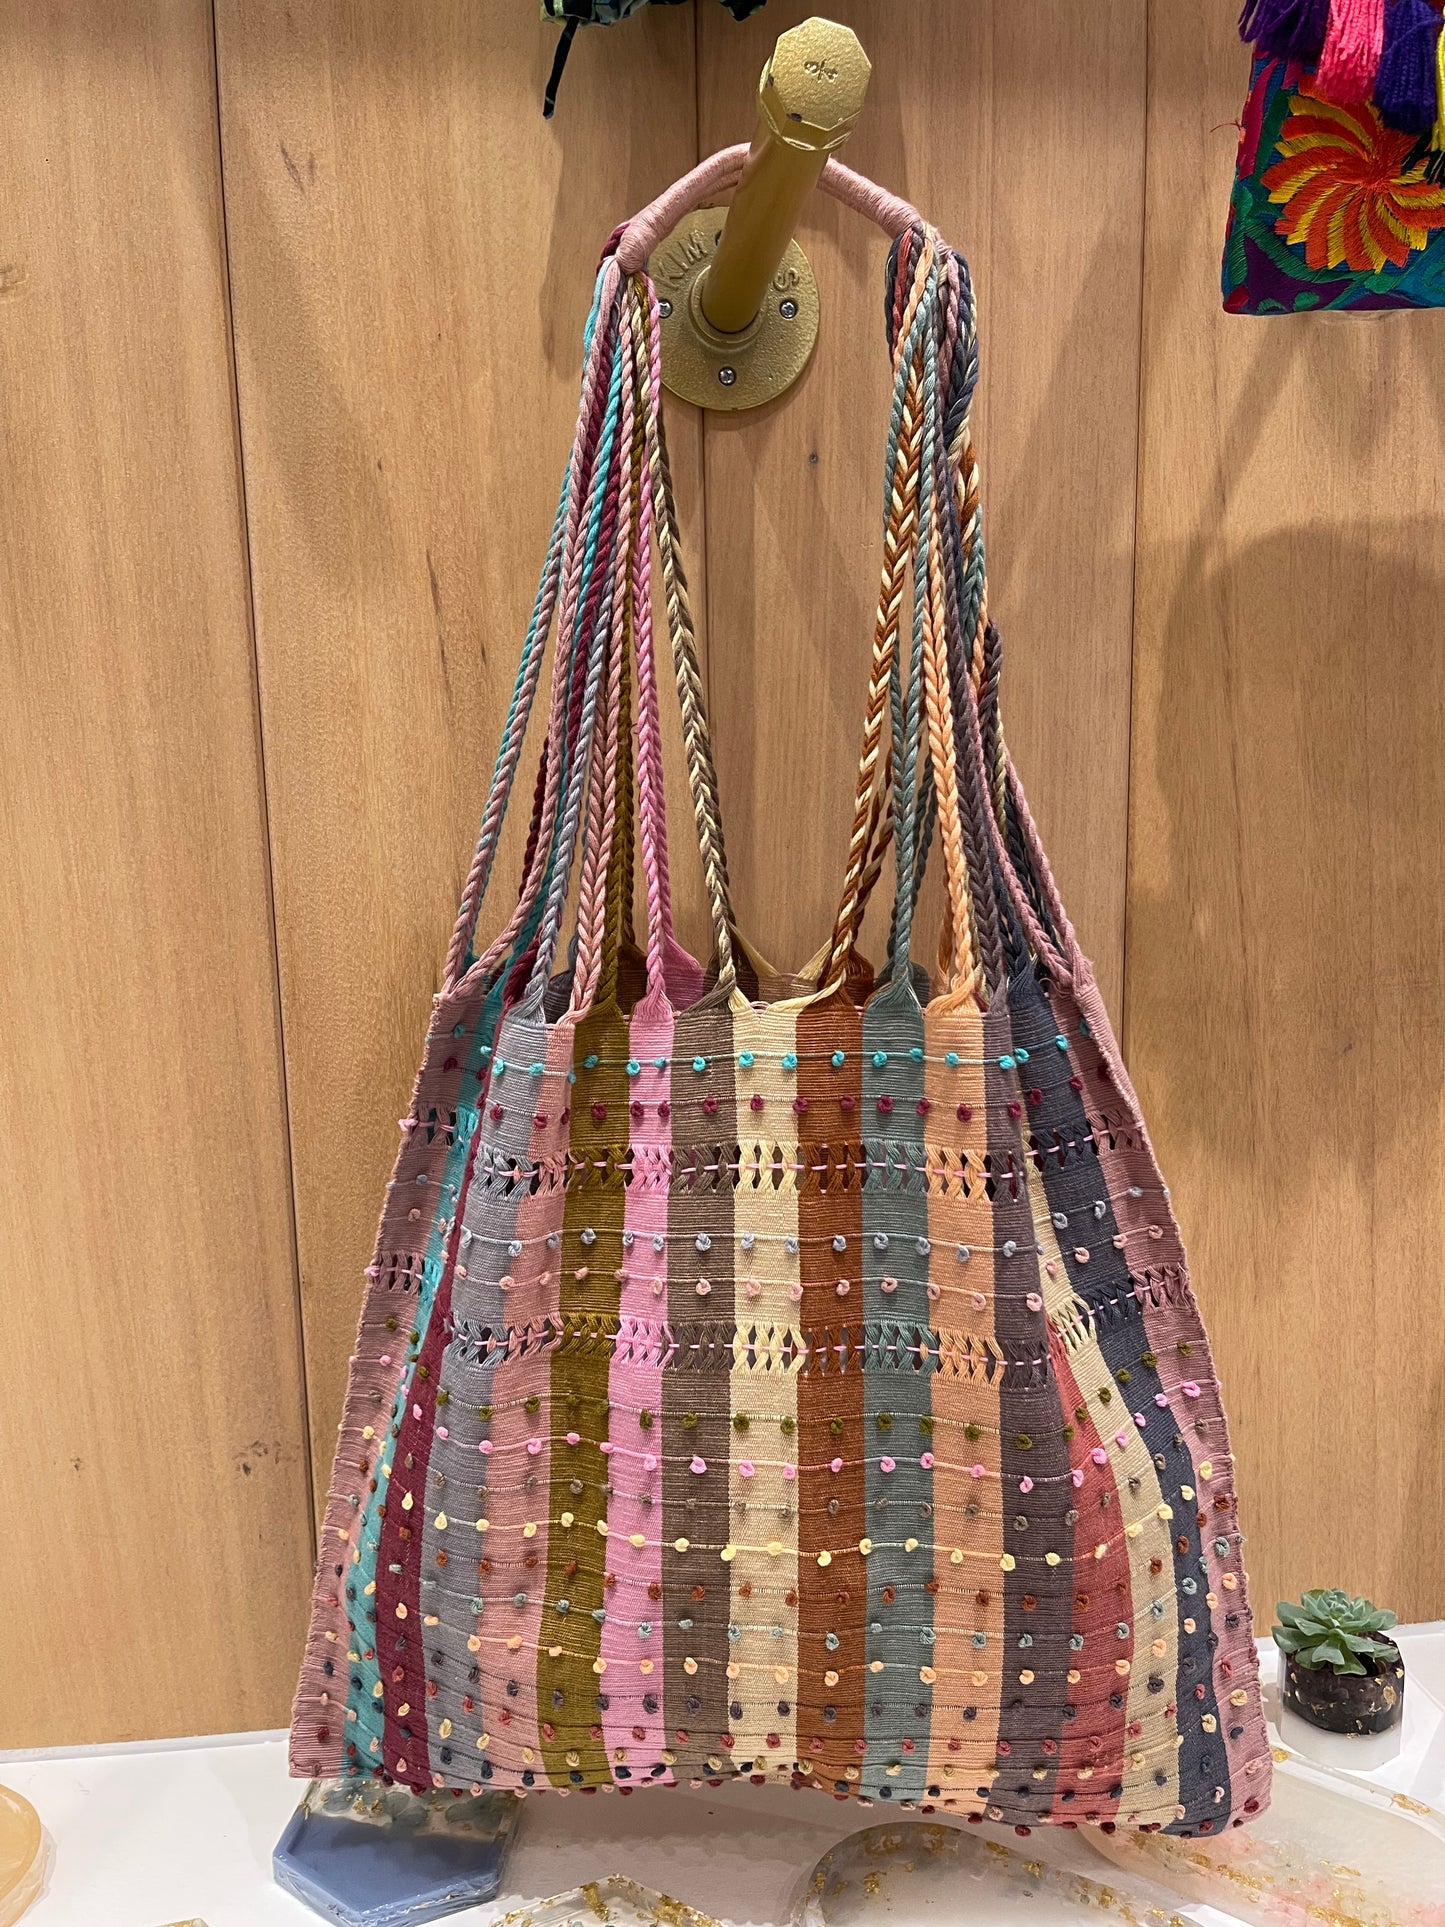 Handmade tote with beading - loveatdawn